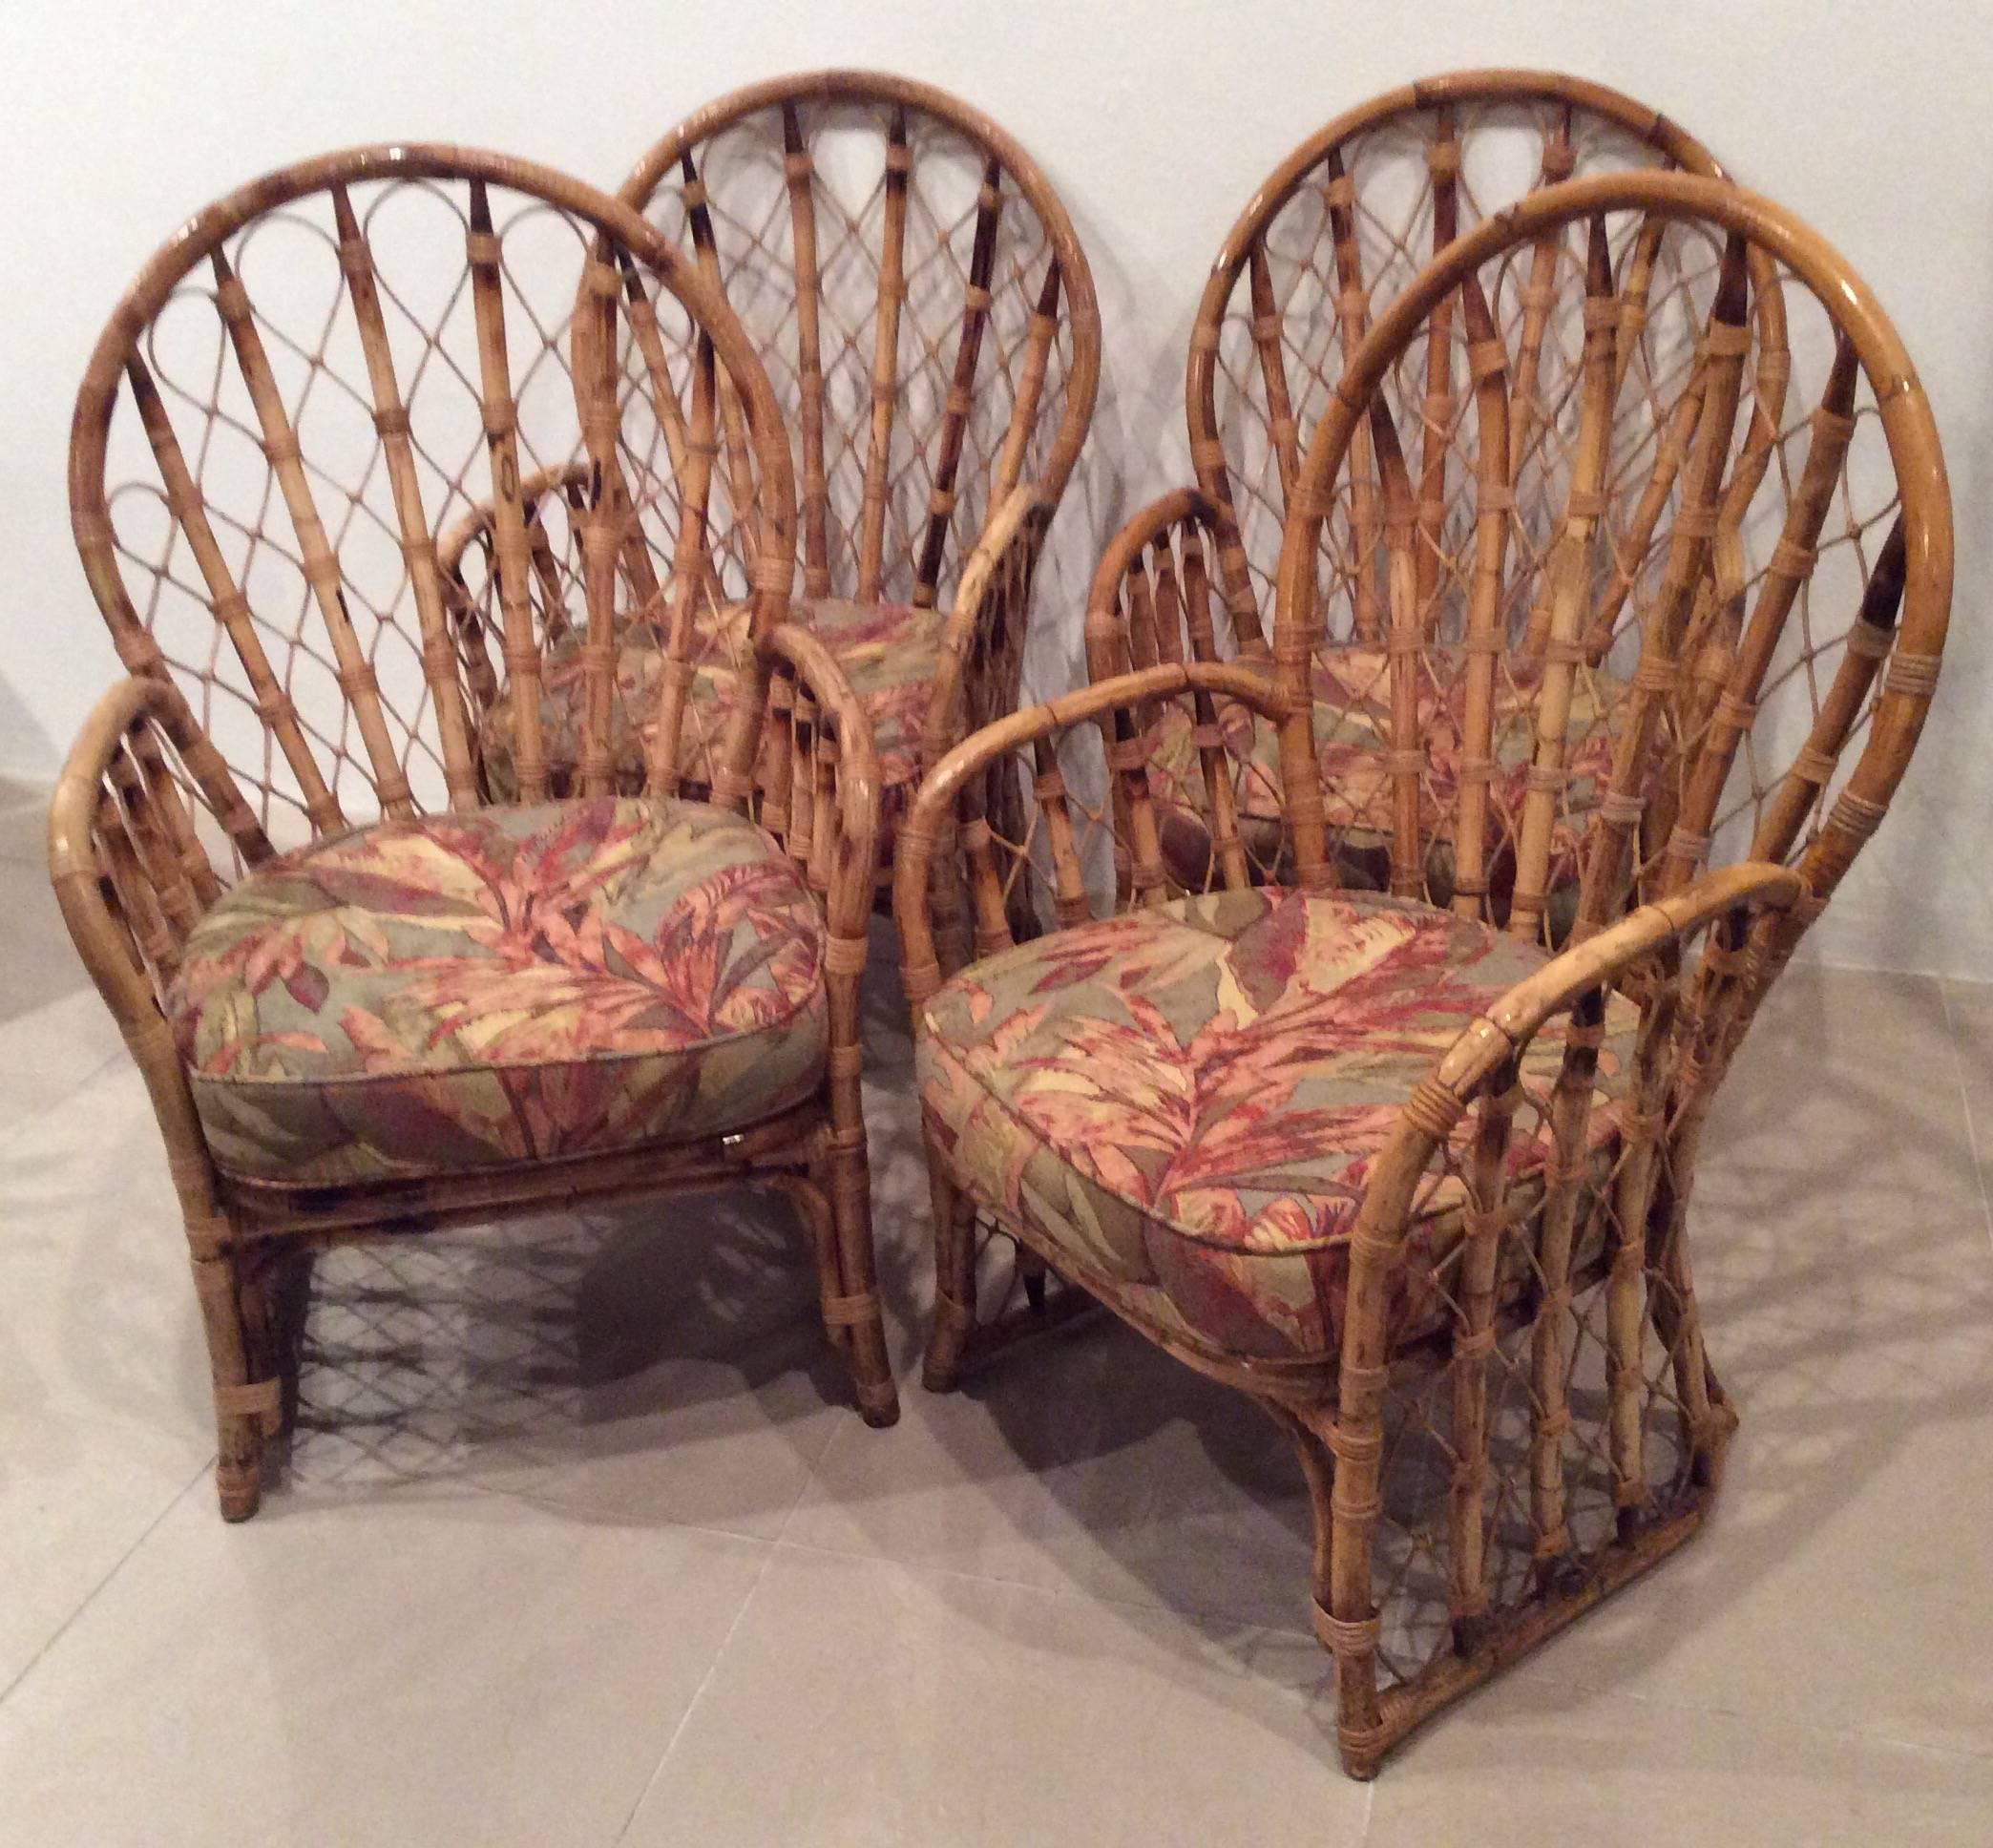 Rattan Wicker Arm Dining Chairs Vintage Set of 4 Faux Bamboo Palm Beach Patio 1